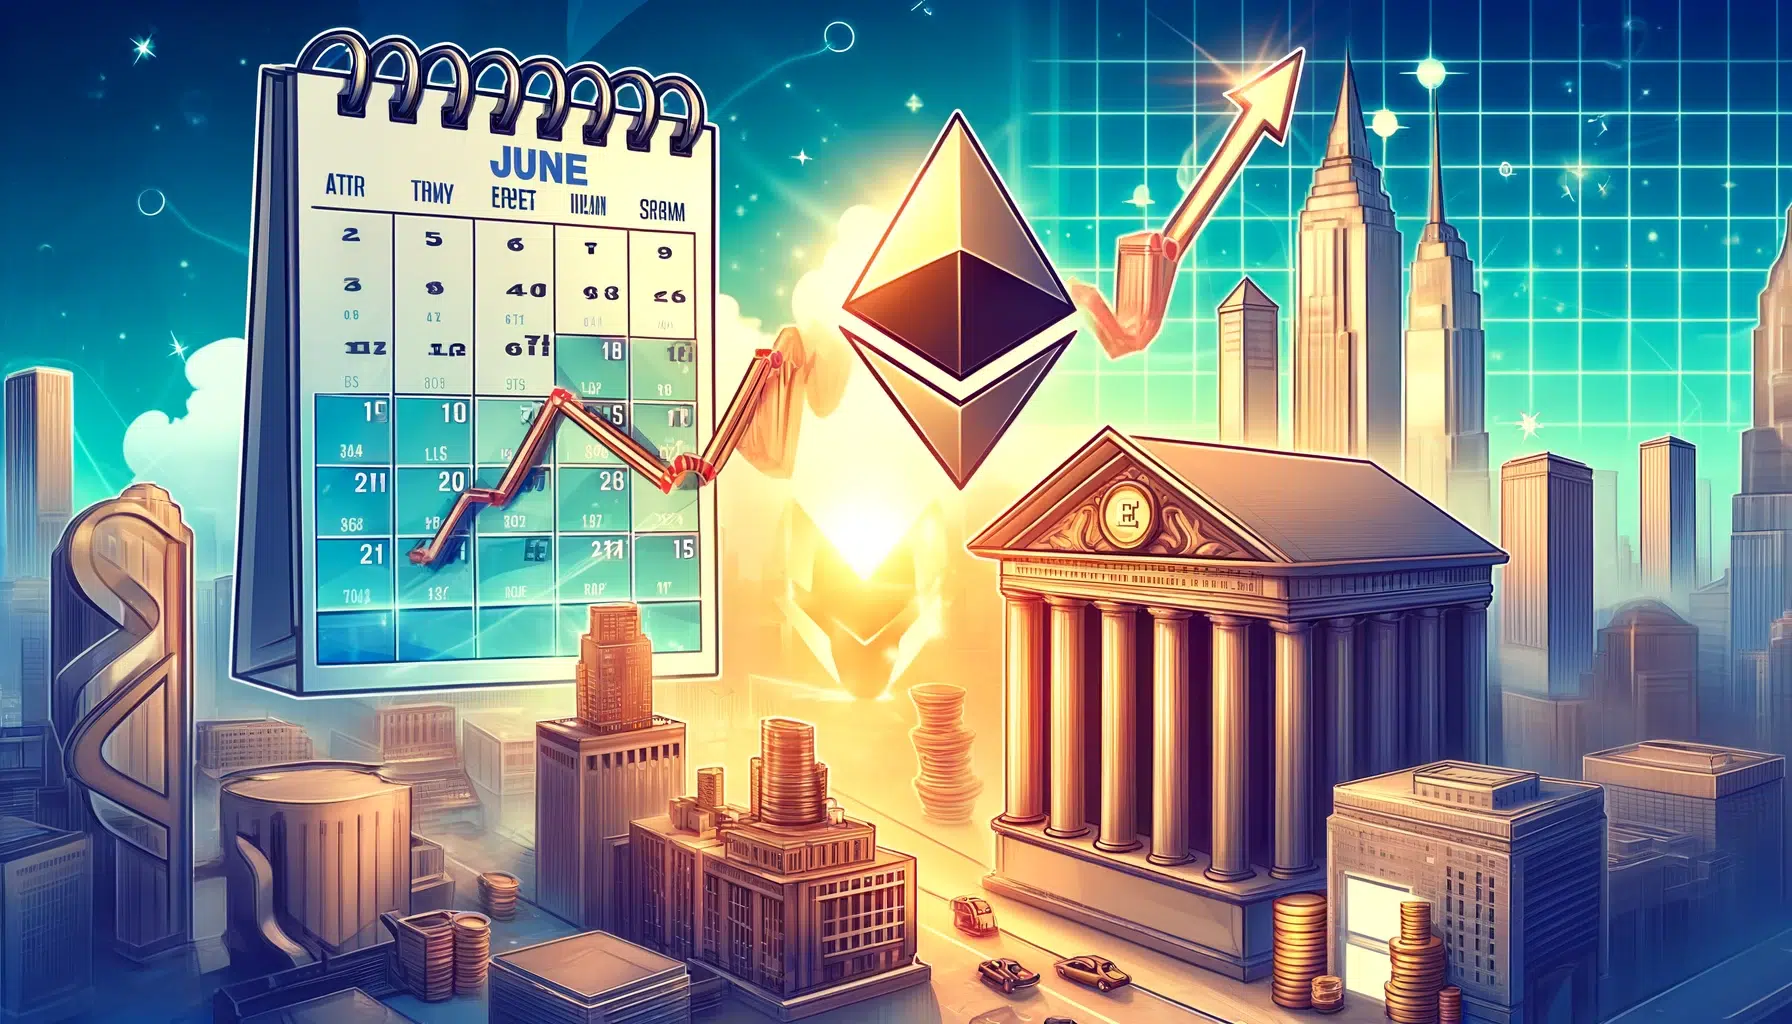 Ethereum (ETH) Price Prediction: $10,000 by Year-End, Says Analyst